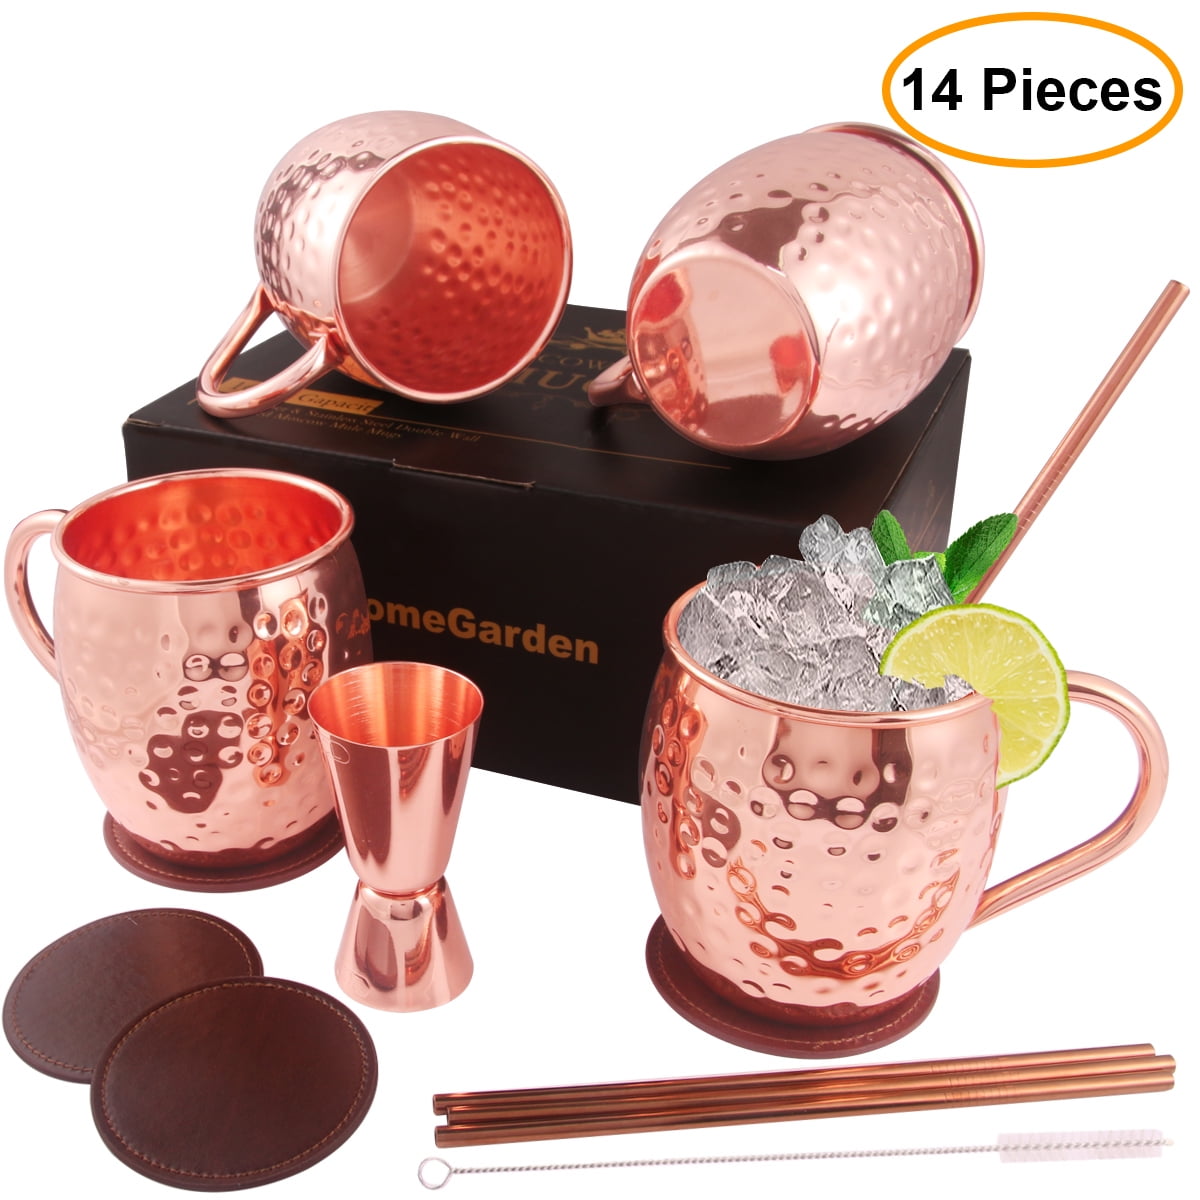 Hemoton Moscow Mule Copper Mugs Hammered Copper Cups for Cocktails 400ml Rose Golden 